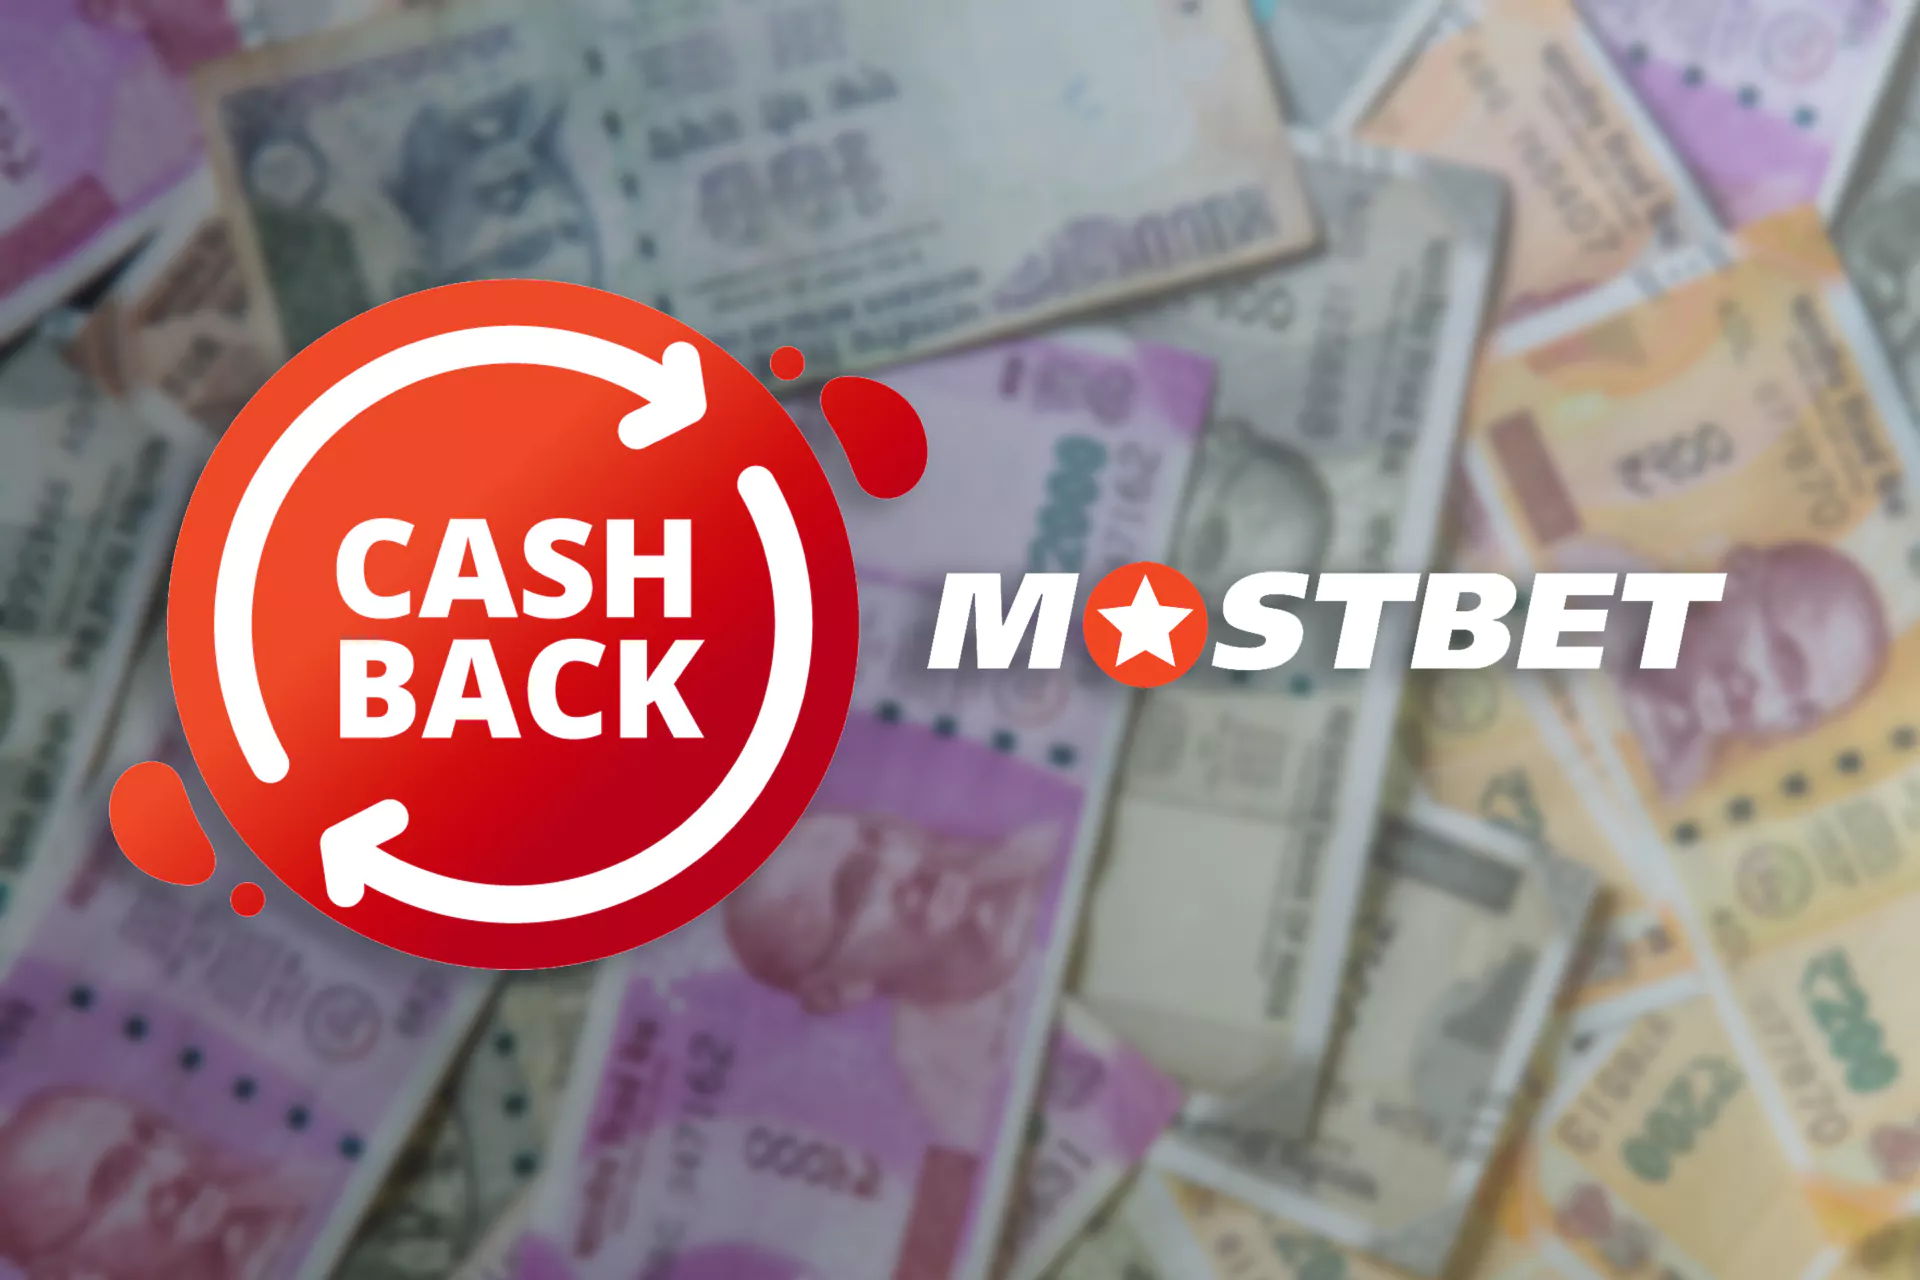 The cashback program allows users to get some funds back.